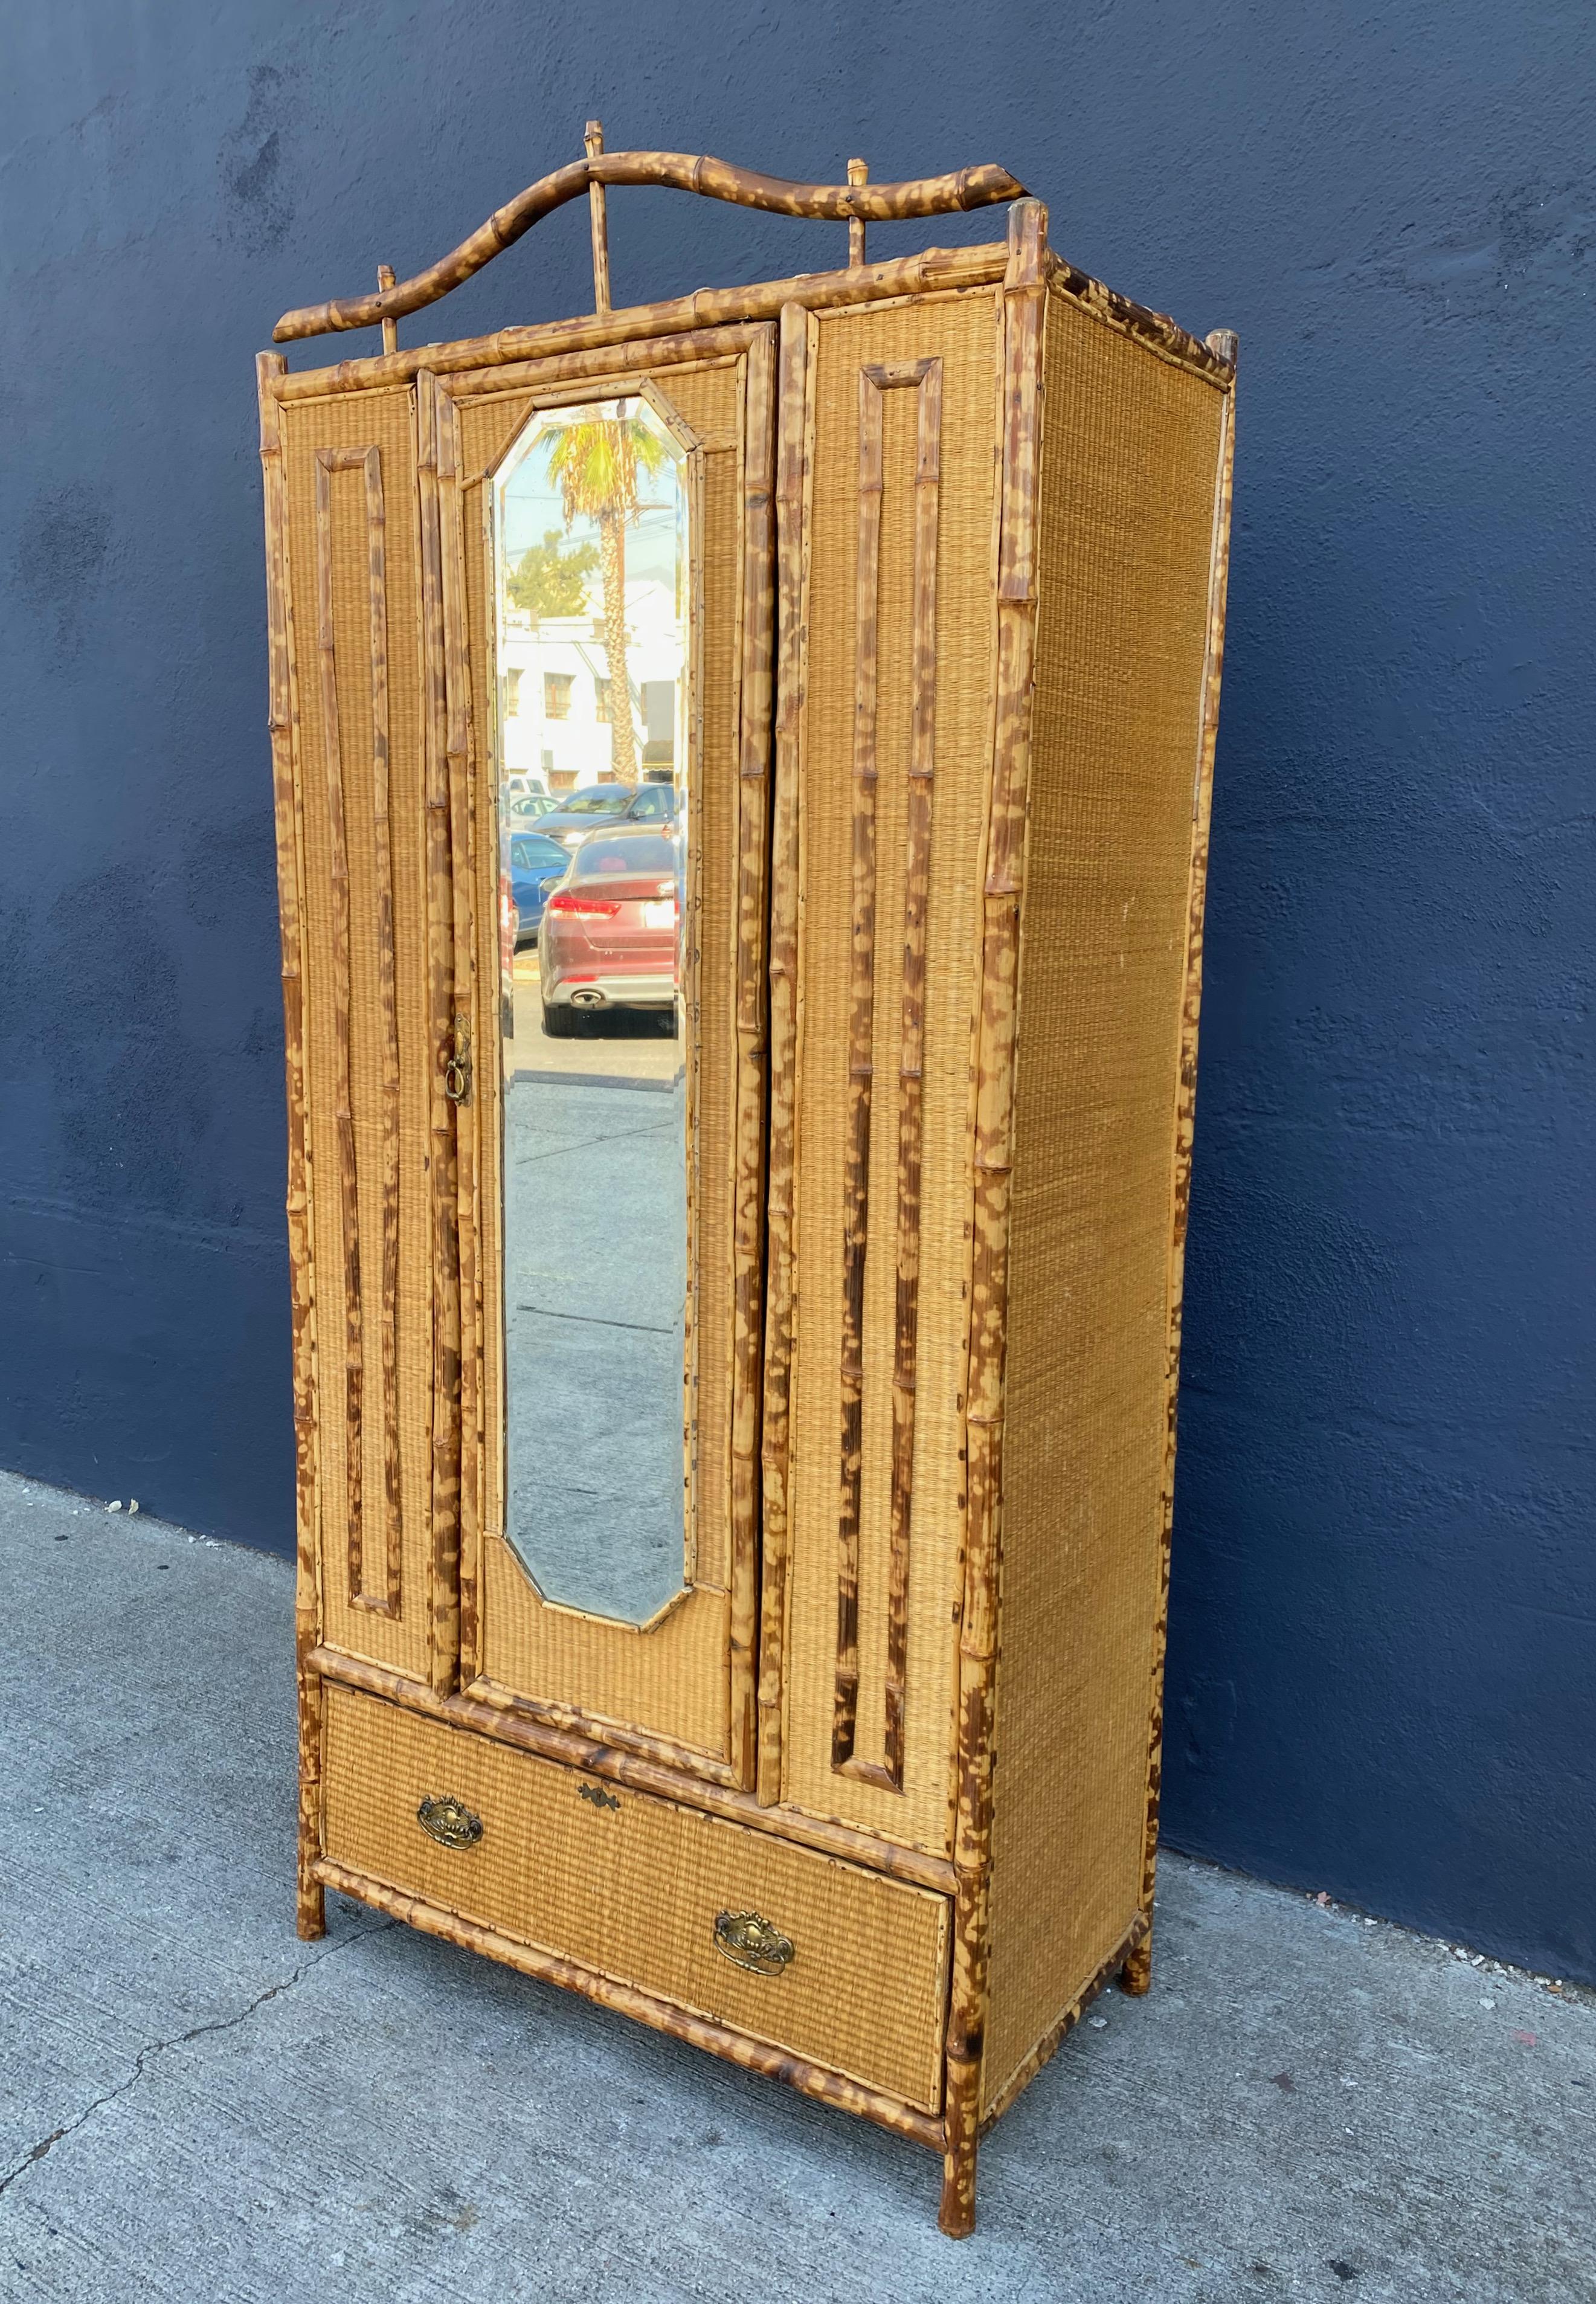 This is a charming late 19th century English bamboo wardrobe or armoire. All elements of the wardrobe are original and in very good condition. The wardrobe features a top section with shelves for storage (it could be fitted with a rod for hanging